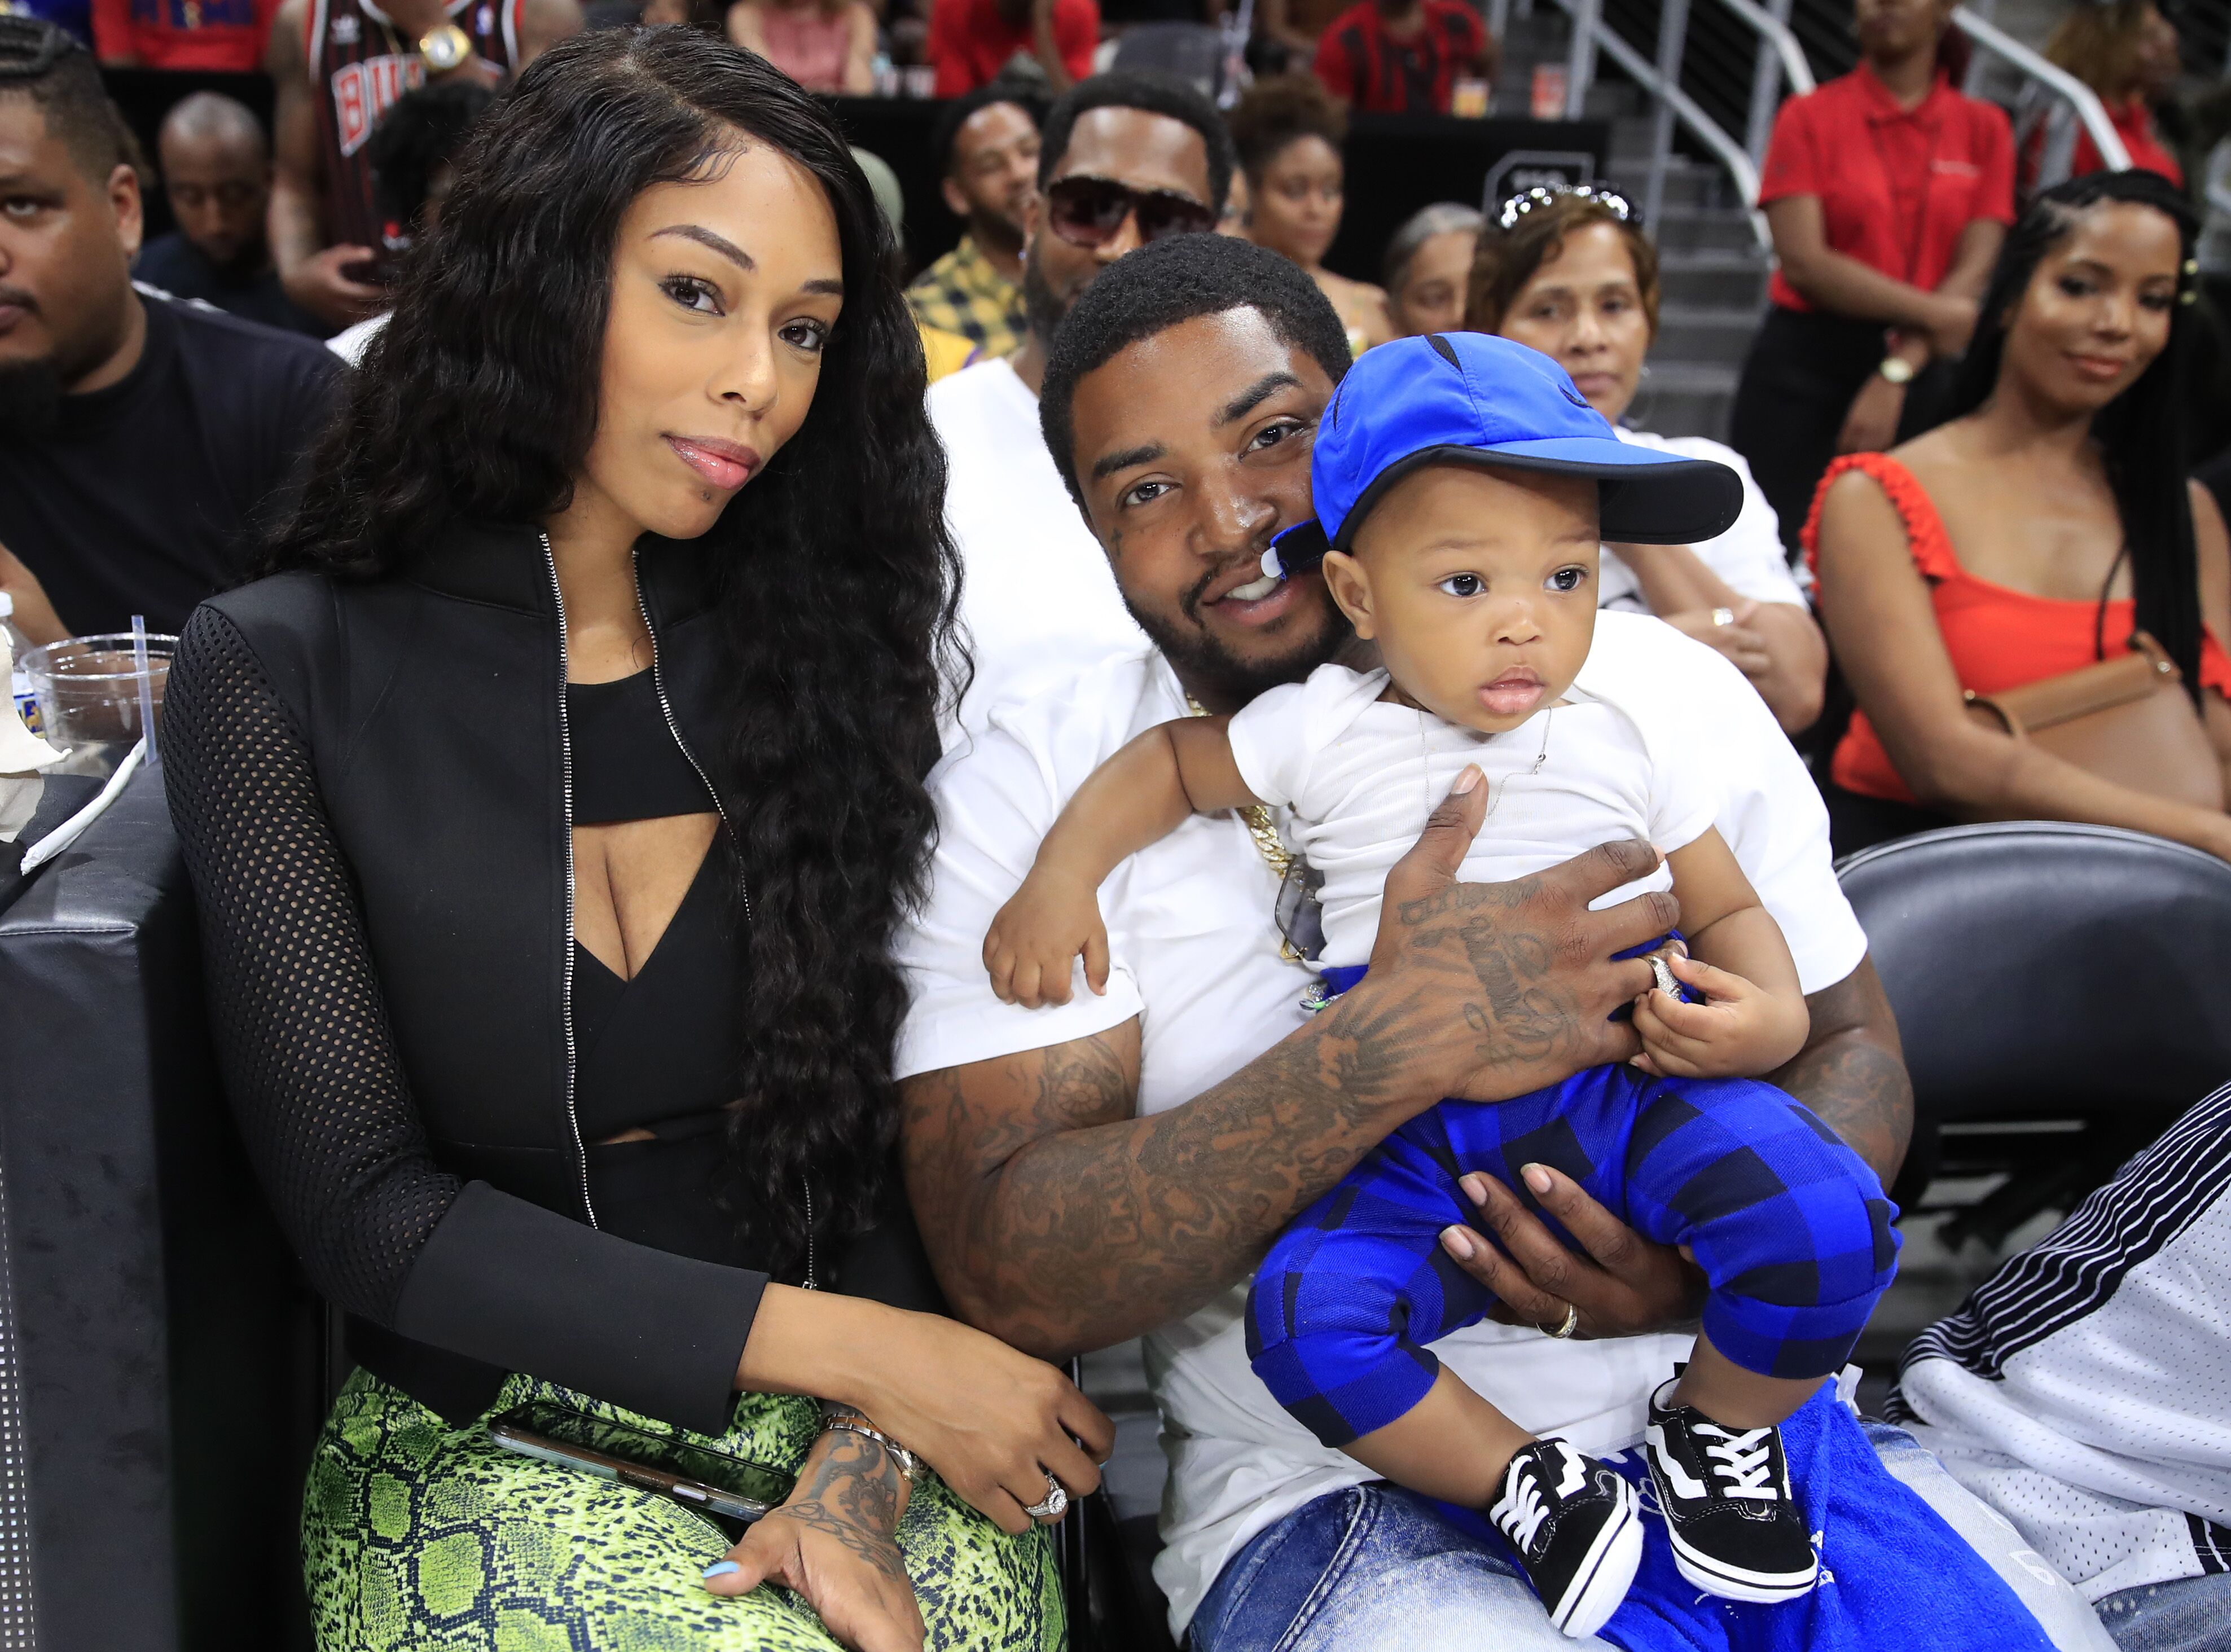 Bambi, Lil Scrappy and their baby Breland attend the game between Power and Trilogy at State Farm Arena on July 07, 2019 in Atlanta, Georgia. | Photo: Getty Images